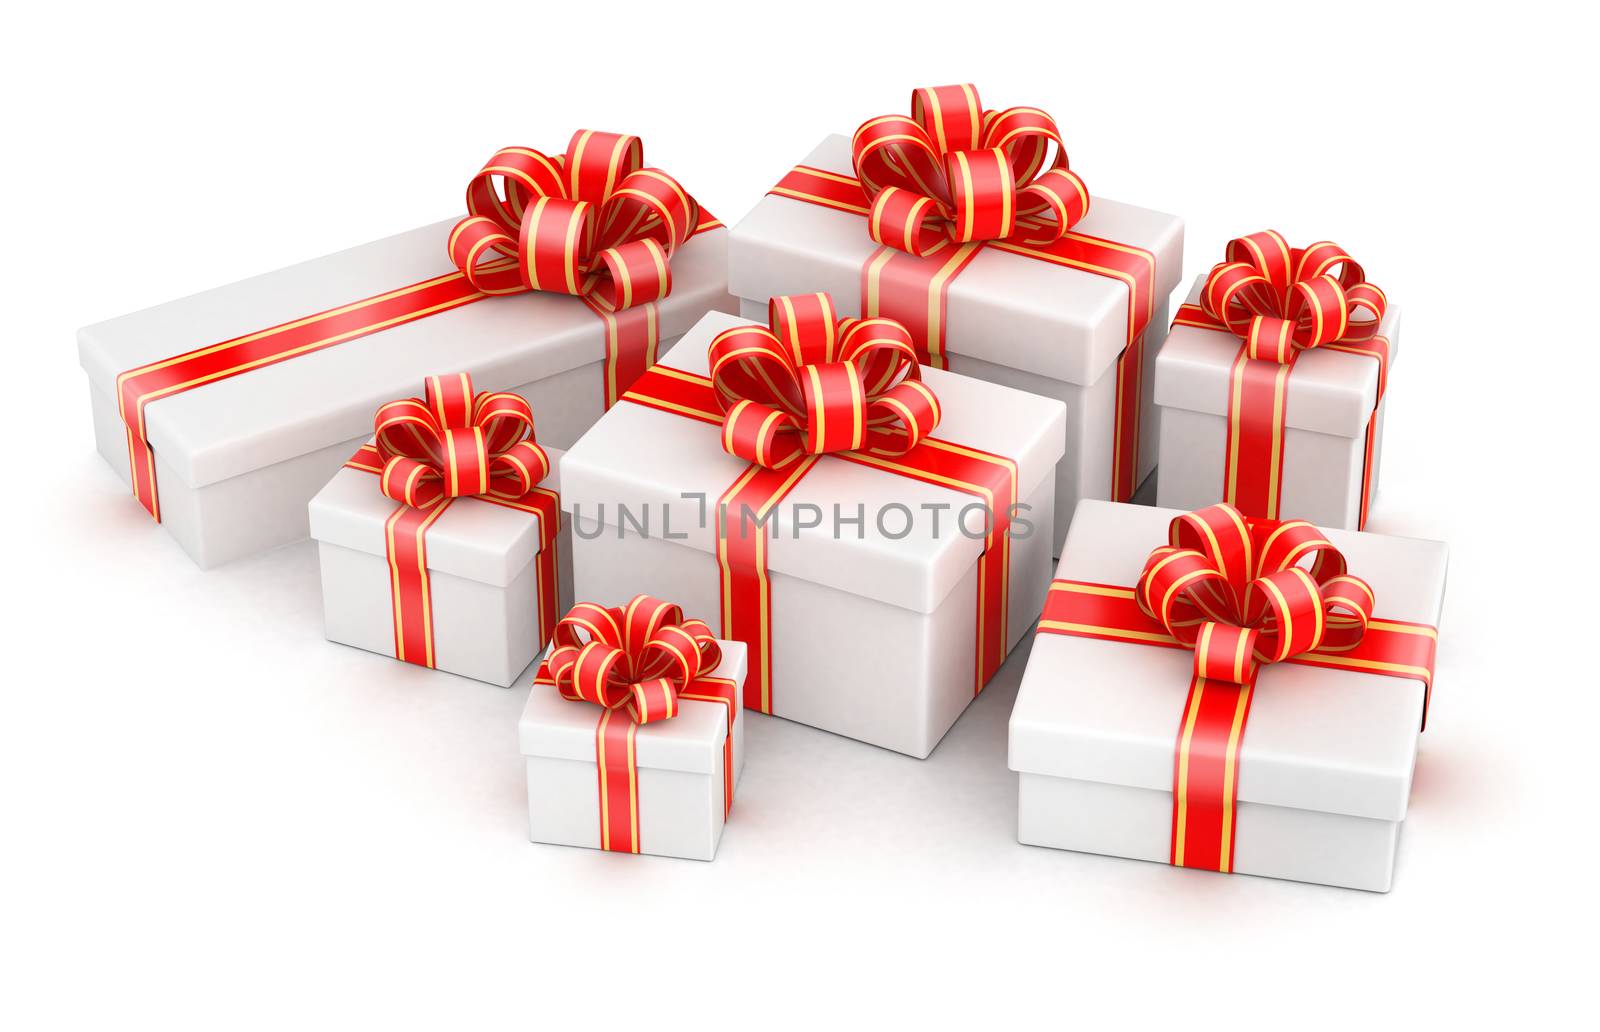 Several white gift boxes with yellow ribbons in pile